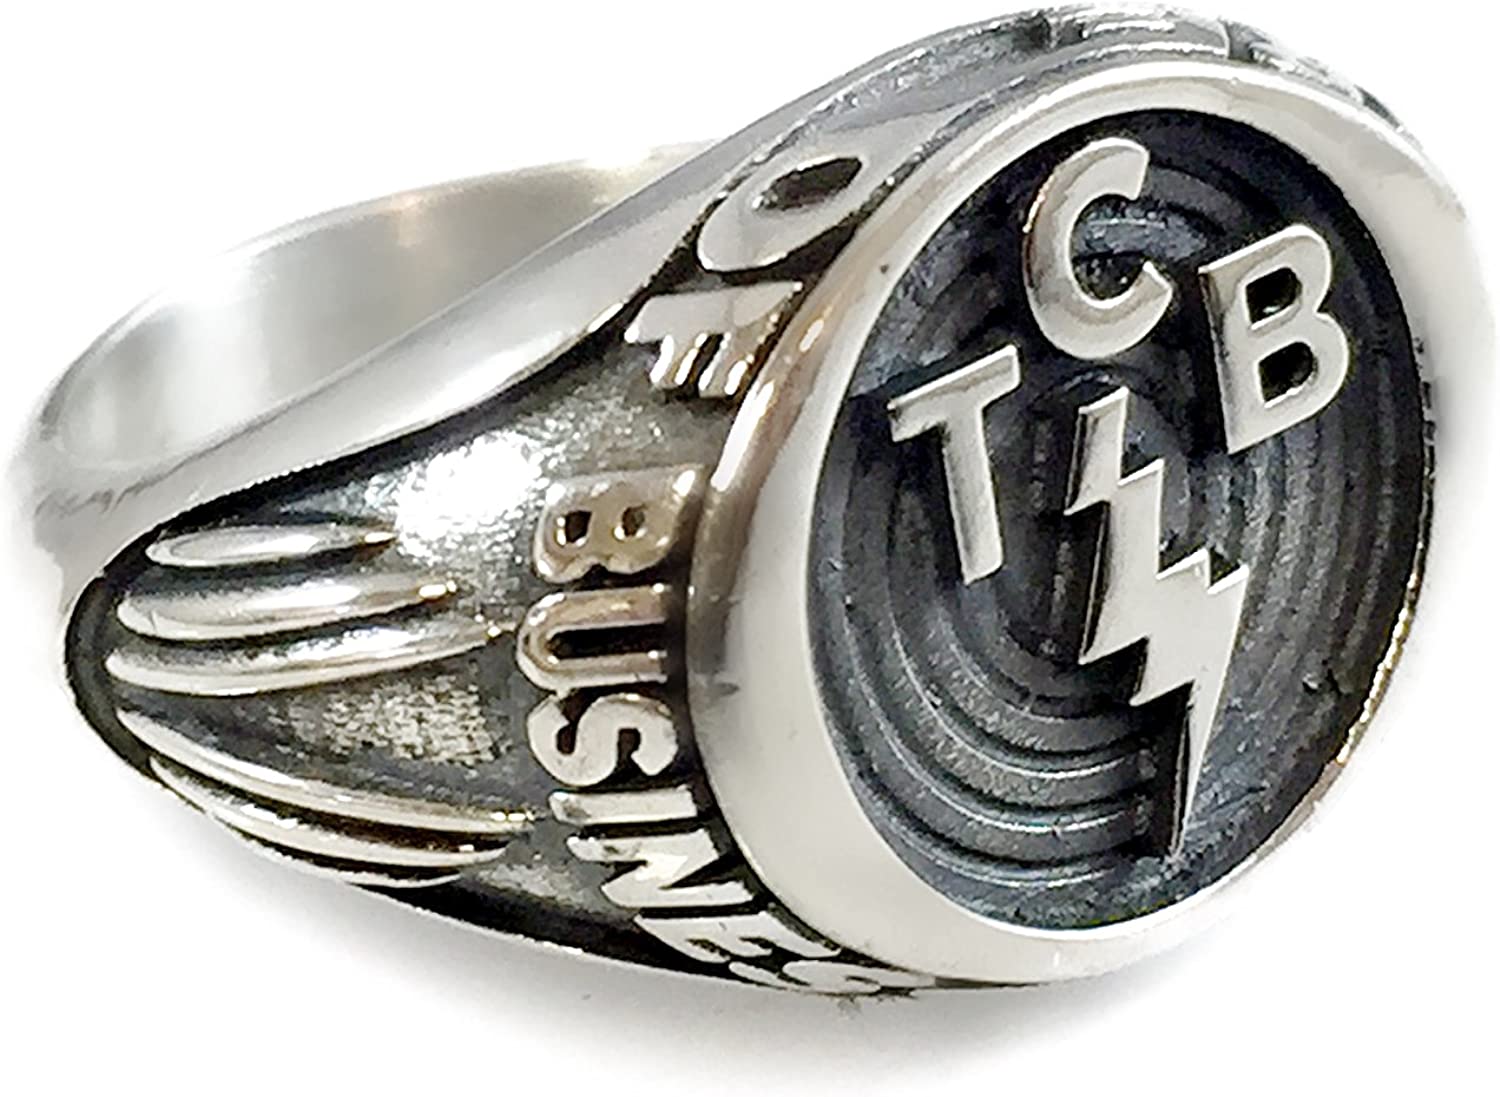 New KING Tcb Ring Solid Sterling Silver 925 All Size Available